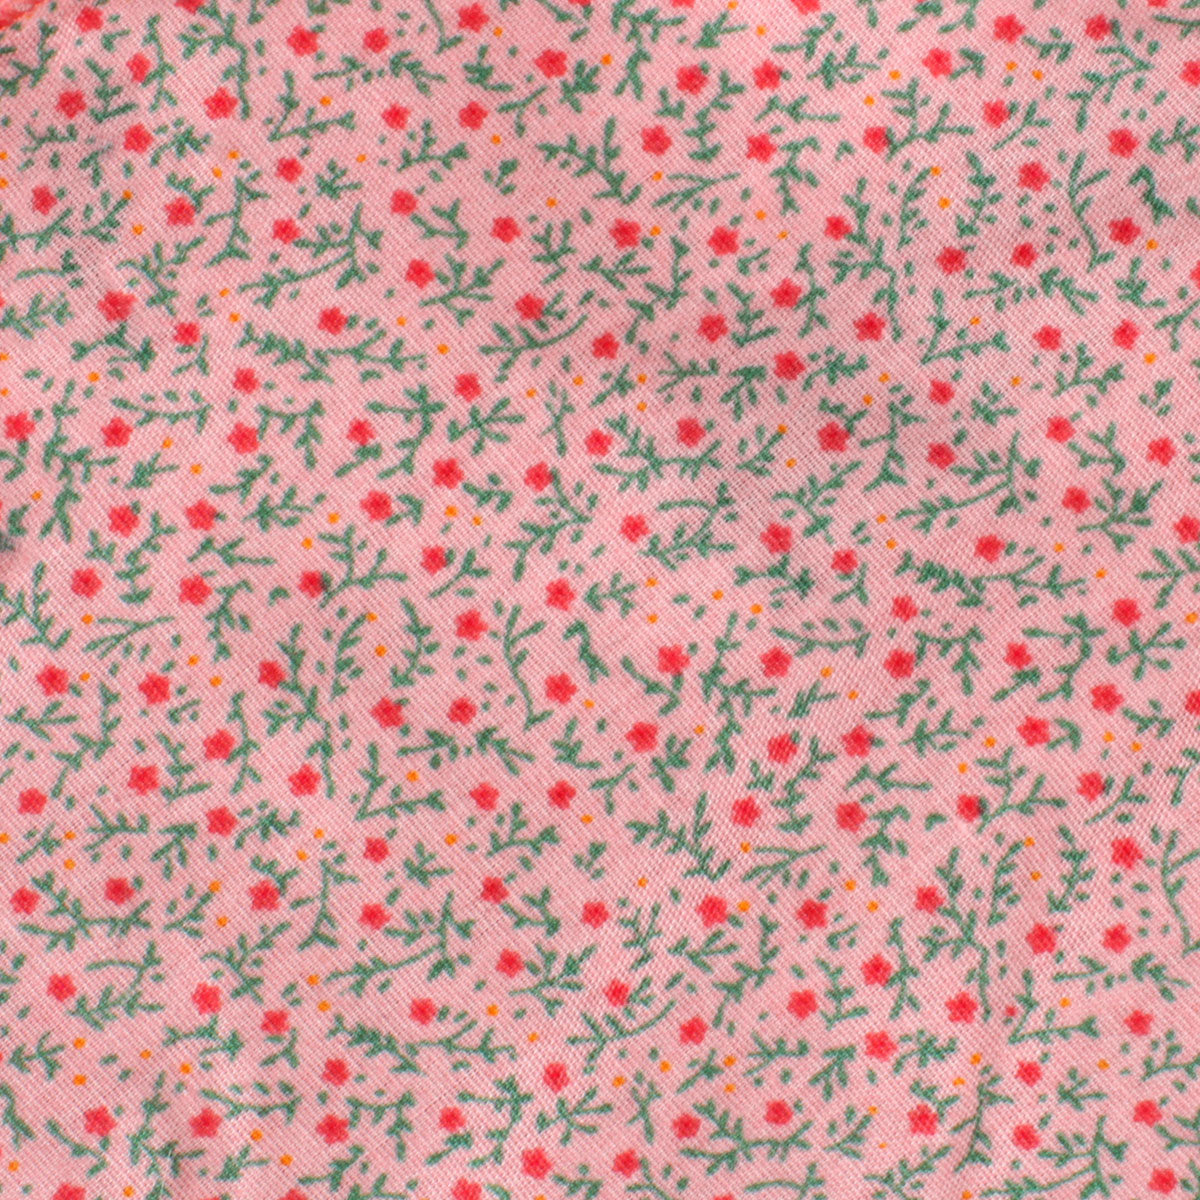 Houston Pink Floral Self Bow Tie Fabric